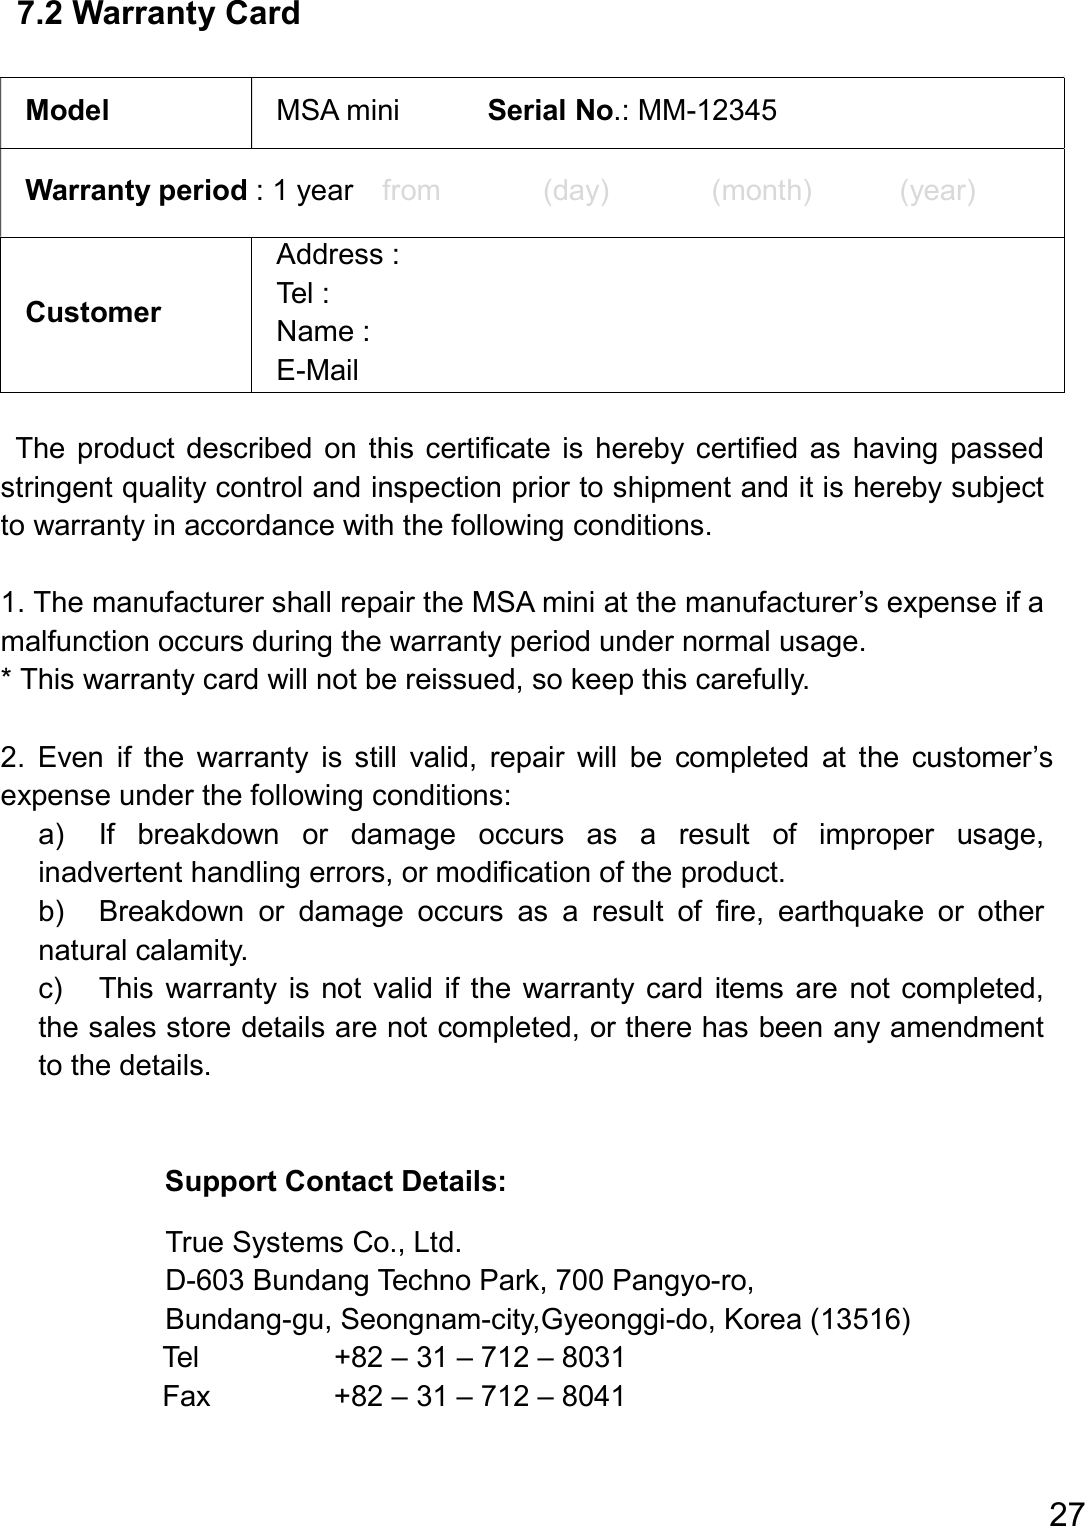  27  7.2 Warranty Card  Model  MSA mini            Serial No.: MM-12345 Warranty period : 1 year    from              (day)              (month)            (year) Customer Address : Tel : Name : E-Mail  The  product  described on  this  certificate  is  hereby certified  as  having passed stringent quality control and inspection prior to shipment and it is hereby subject to warranty in accordance with the following conditions.  1. The manufacturer shall repair the MSA mini at the manufacturer’s expense if a malfunction occurs during the warranty period under normal usage.   * This warranty card will not be reissued, so keep this carefully.  2.  Even  if  the  warranty  is  still  valid,  repair  will  be  completed  at  the  customer’s expense under the following conditions: a)    If  breakdown  or  damage  occurs  as  a  result  of  improper  usage, inadvertent handling errors, or modification of the product. b)    Breakdown  or  damage  occurs  as  a  result  of  fire,  earthquake  or  other natural calamity. c)    This warranty  is not valid if the  warranty  card  items  are  not completed, the sales store details are not completed, or there has been any amendment to the details.   Support Contact Details:  True Systems Co., Ltd. D-603 Bundang Techno Park, 700 Pangyo-ro, Bundang-gu, Seongnam-city,Gyeonggi-do, Korea (13516) Tel    +82 – 31 – 712 – 8031 Fax    +82 – 31 – 712 – 8041    